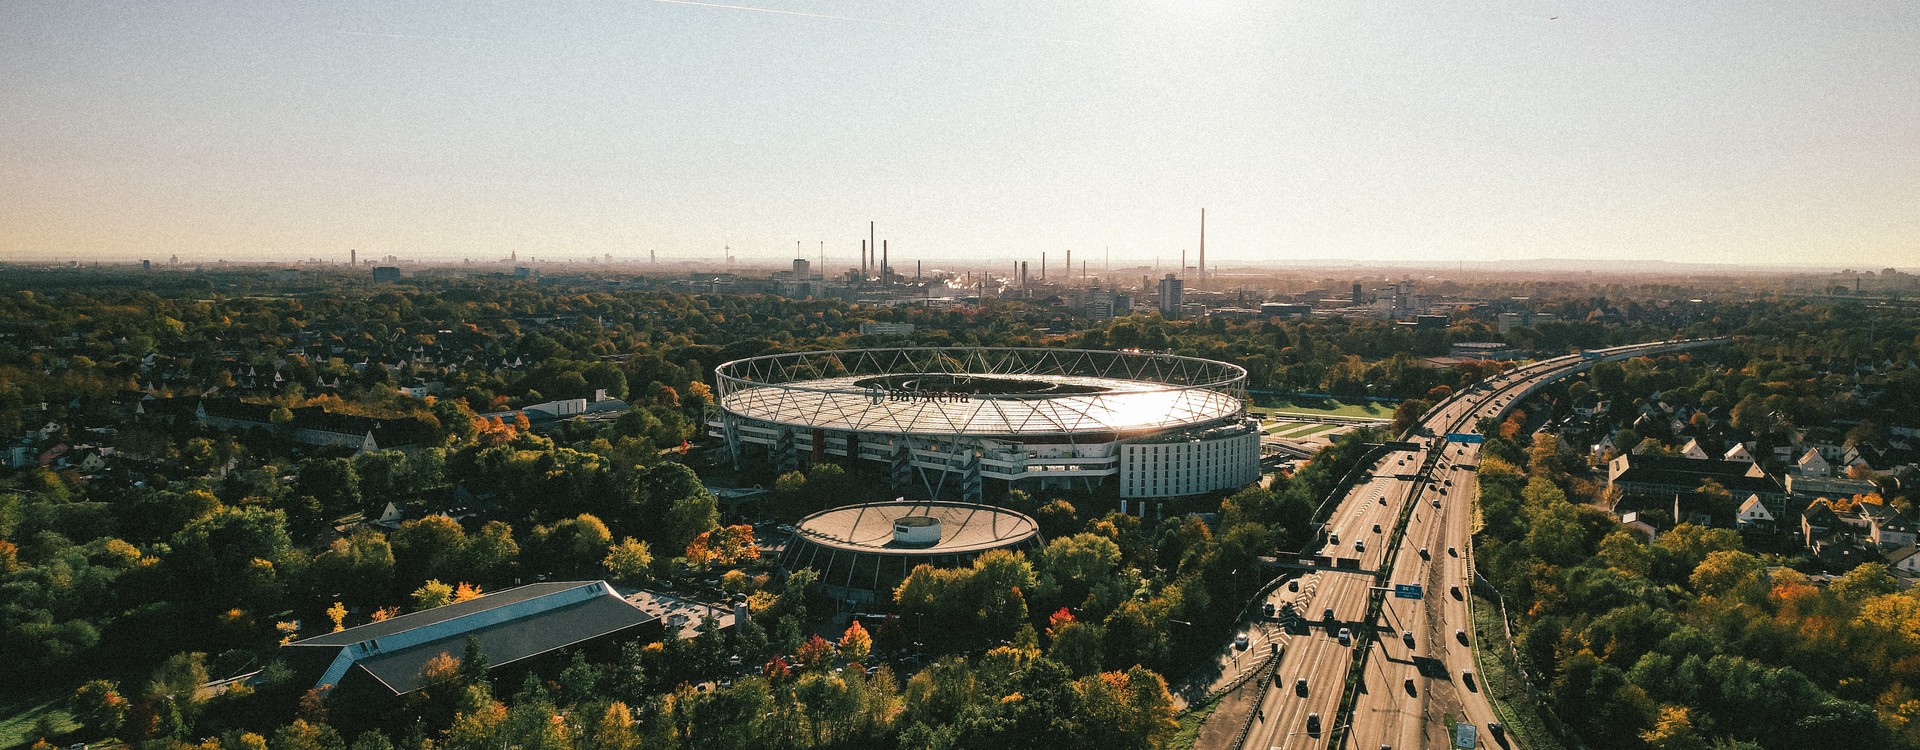 an_aerial_view_of_a_large_stadium_surrounded_by_trees - ©sebastianmark